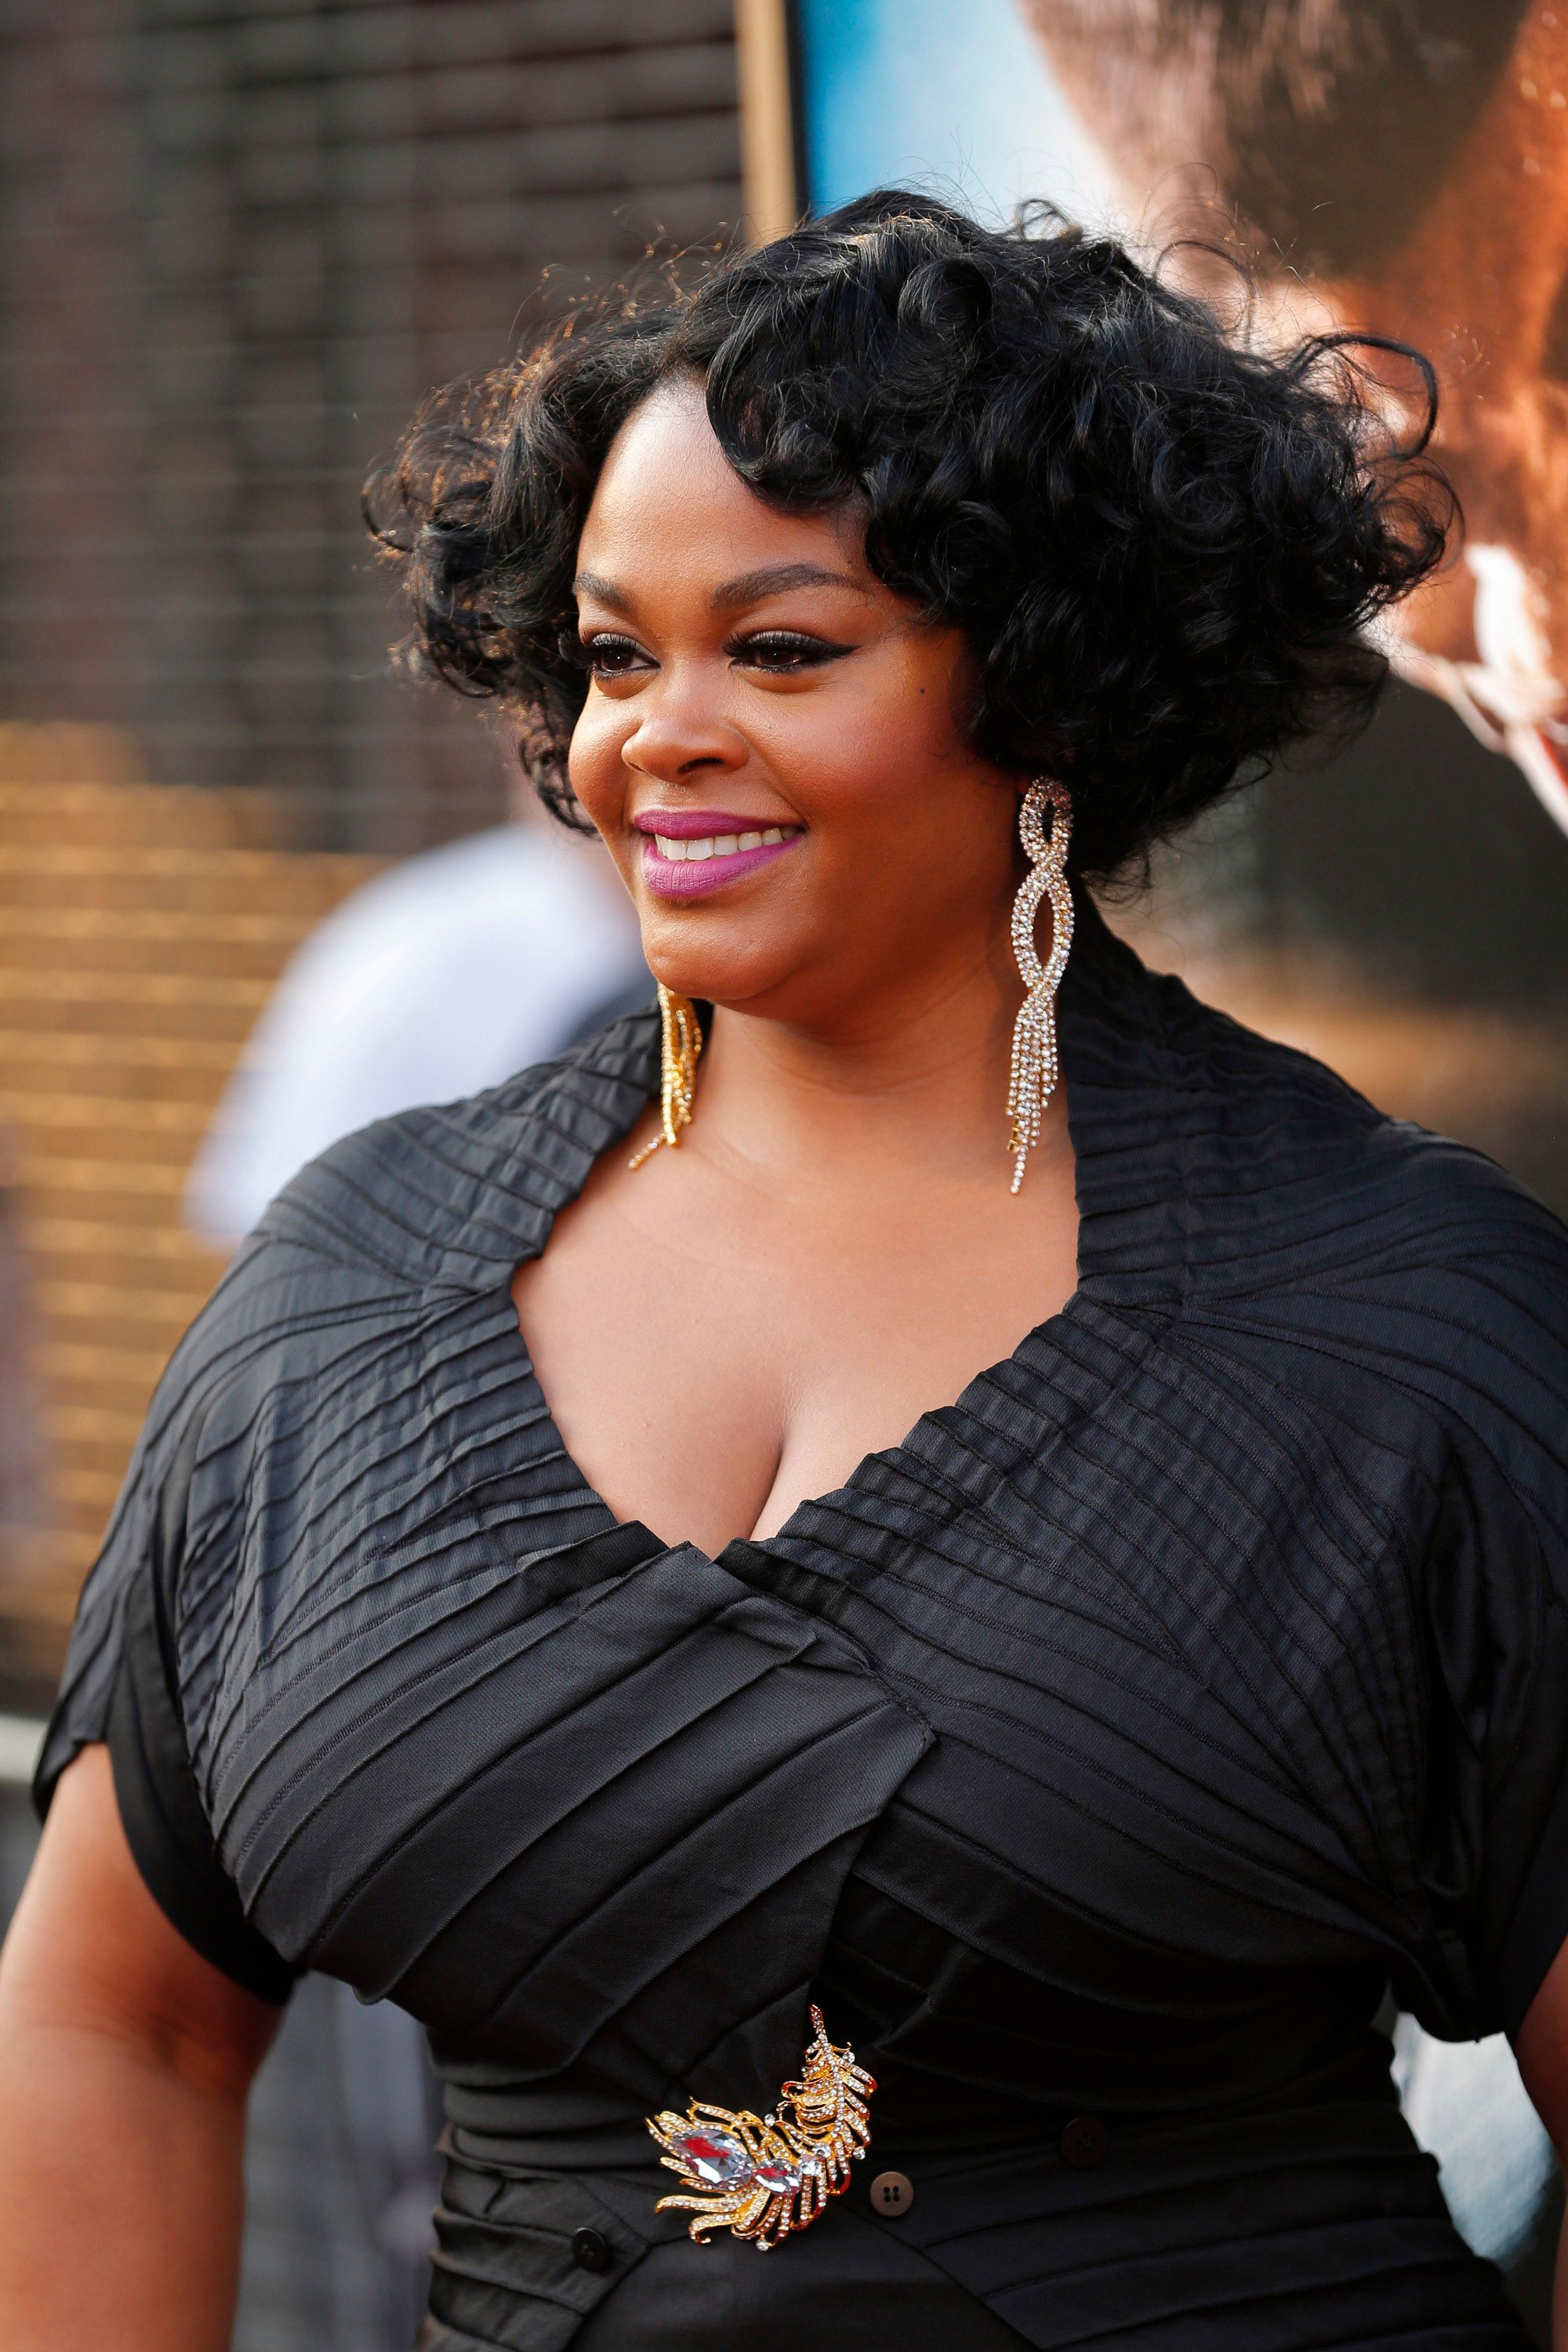 Jill Scott at the premiere of "Get On Up" in 2014 in New York | Source: Getty Images